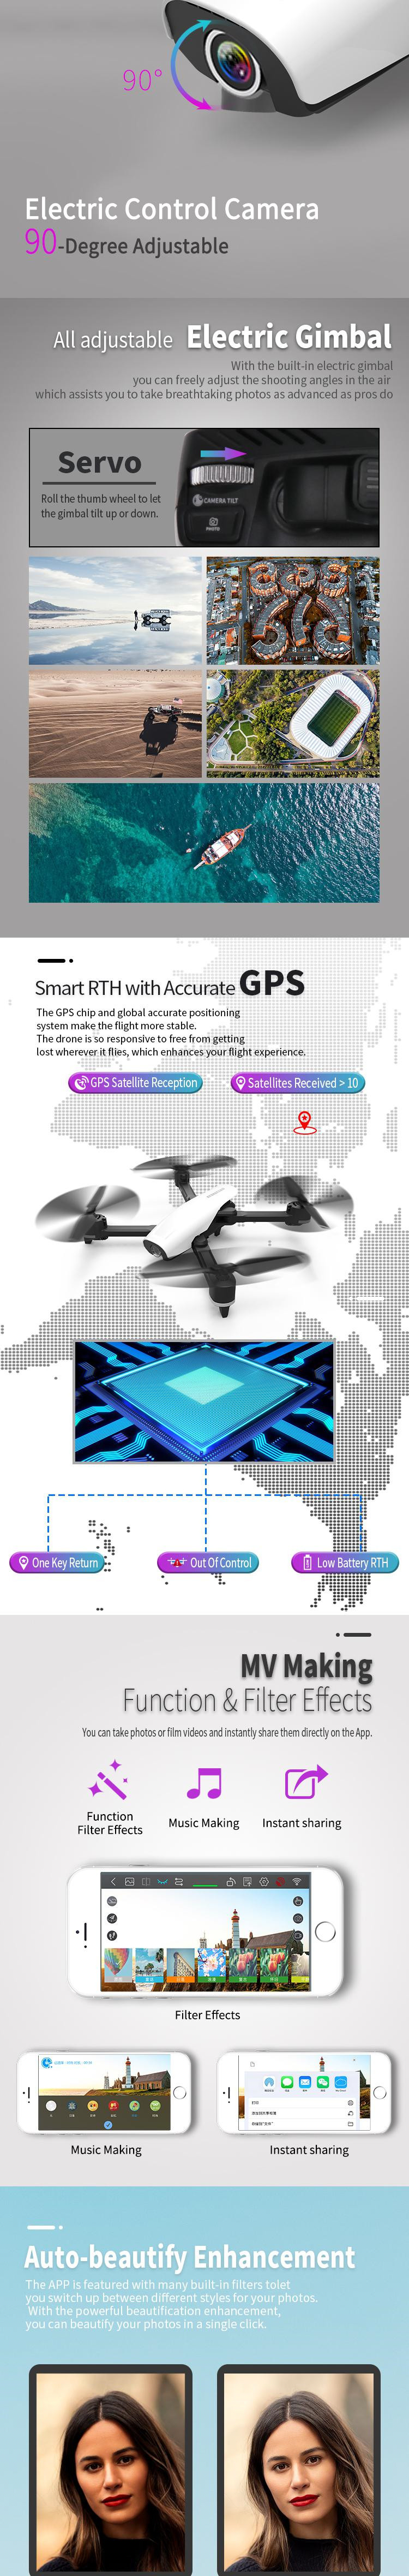 G05-5G-WIFI-Aerial-Drone-With-4K-HD-Camera-GPS-Positioning-20mins-Flight-Time-Follow-Me-Foldable-RC--1759307-2